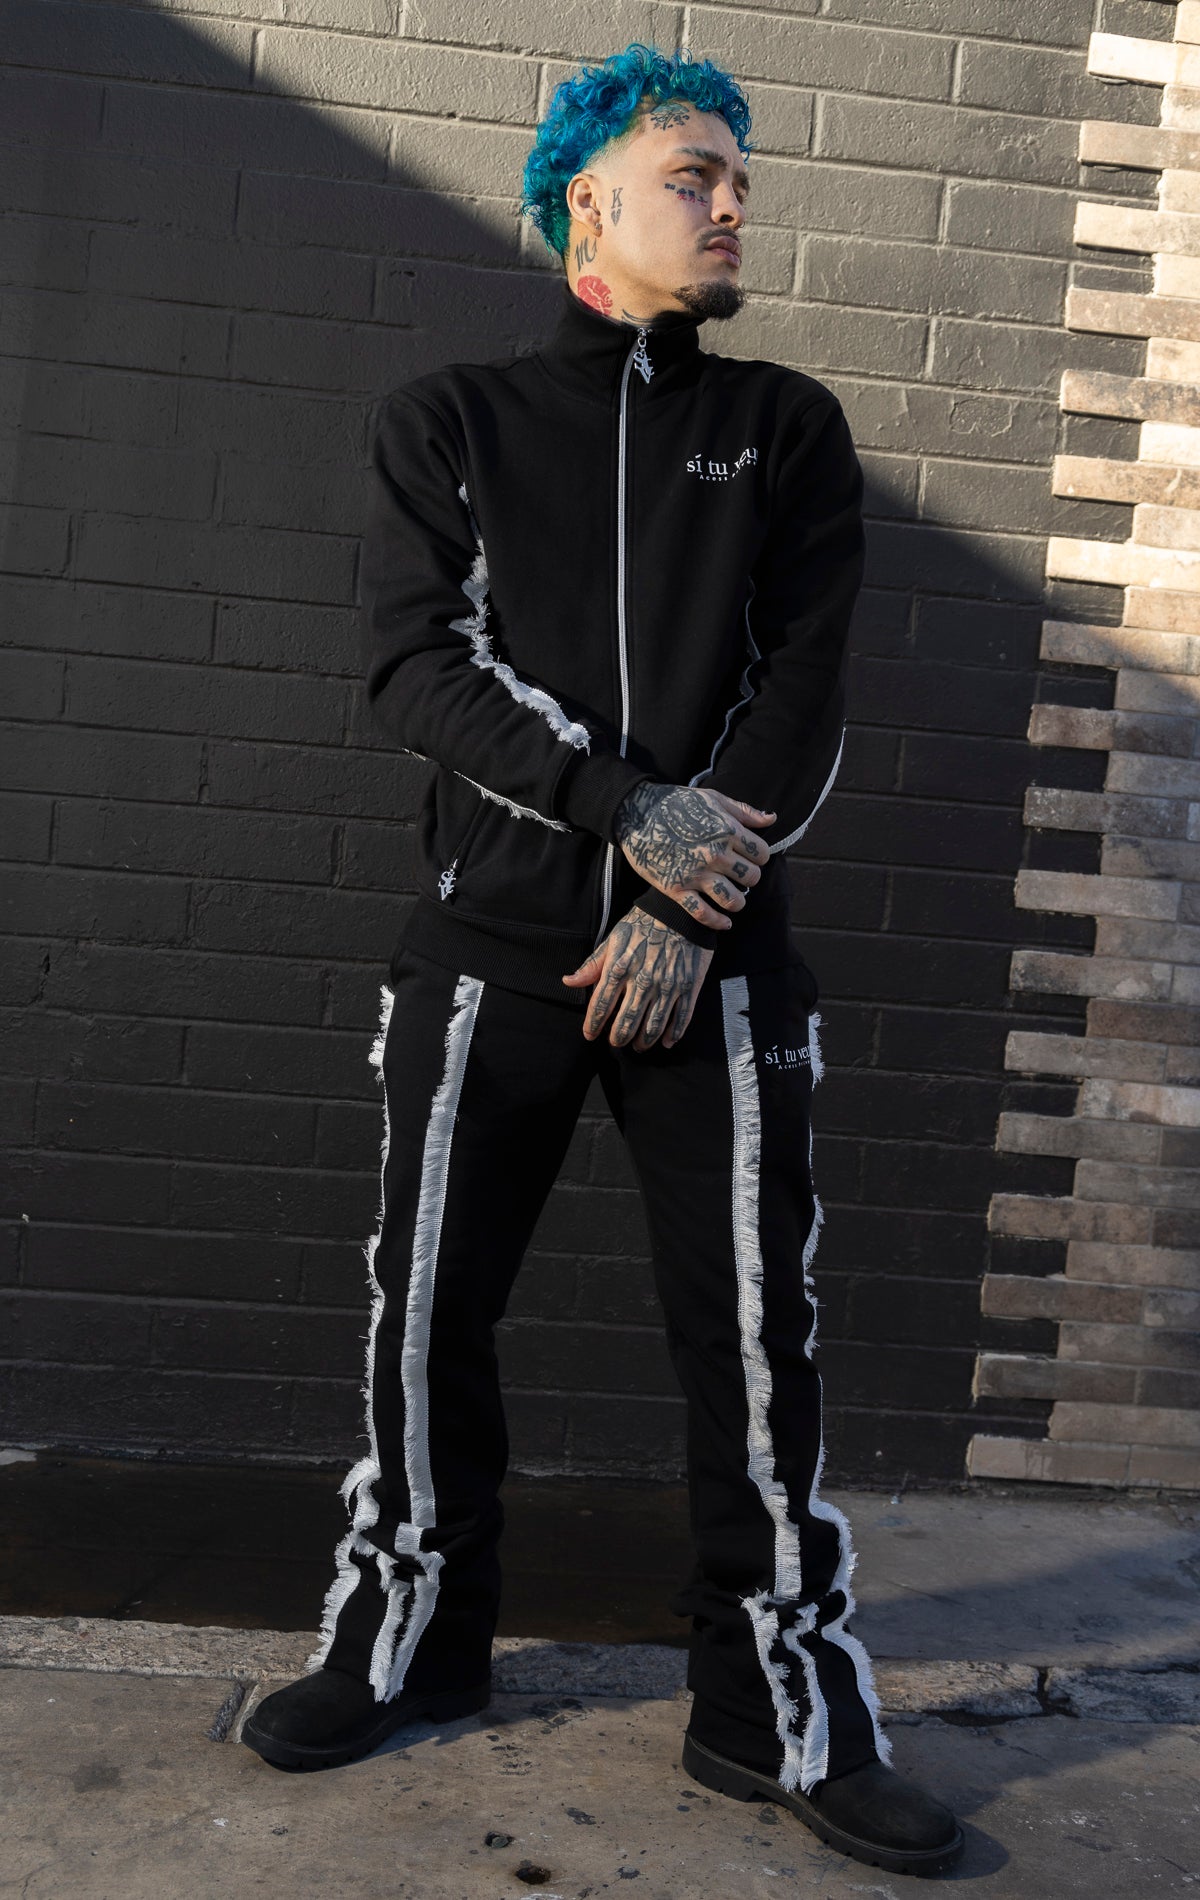 Daredevil track jacket and joggers